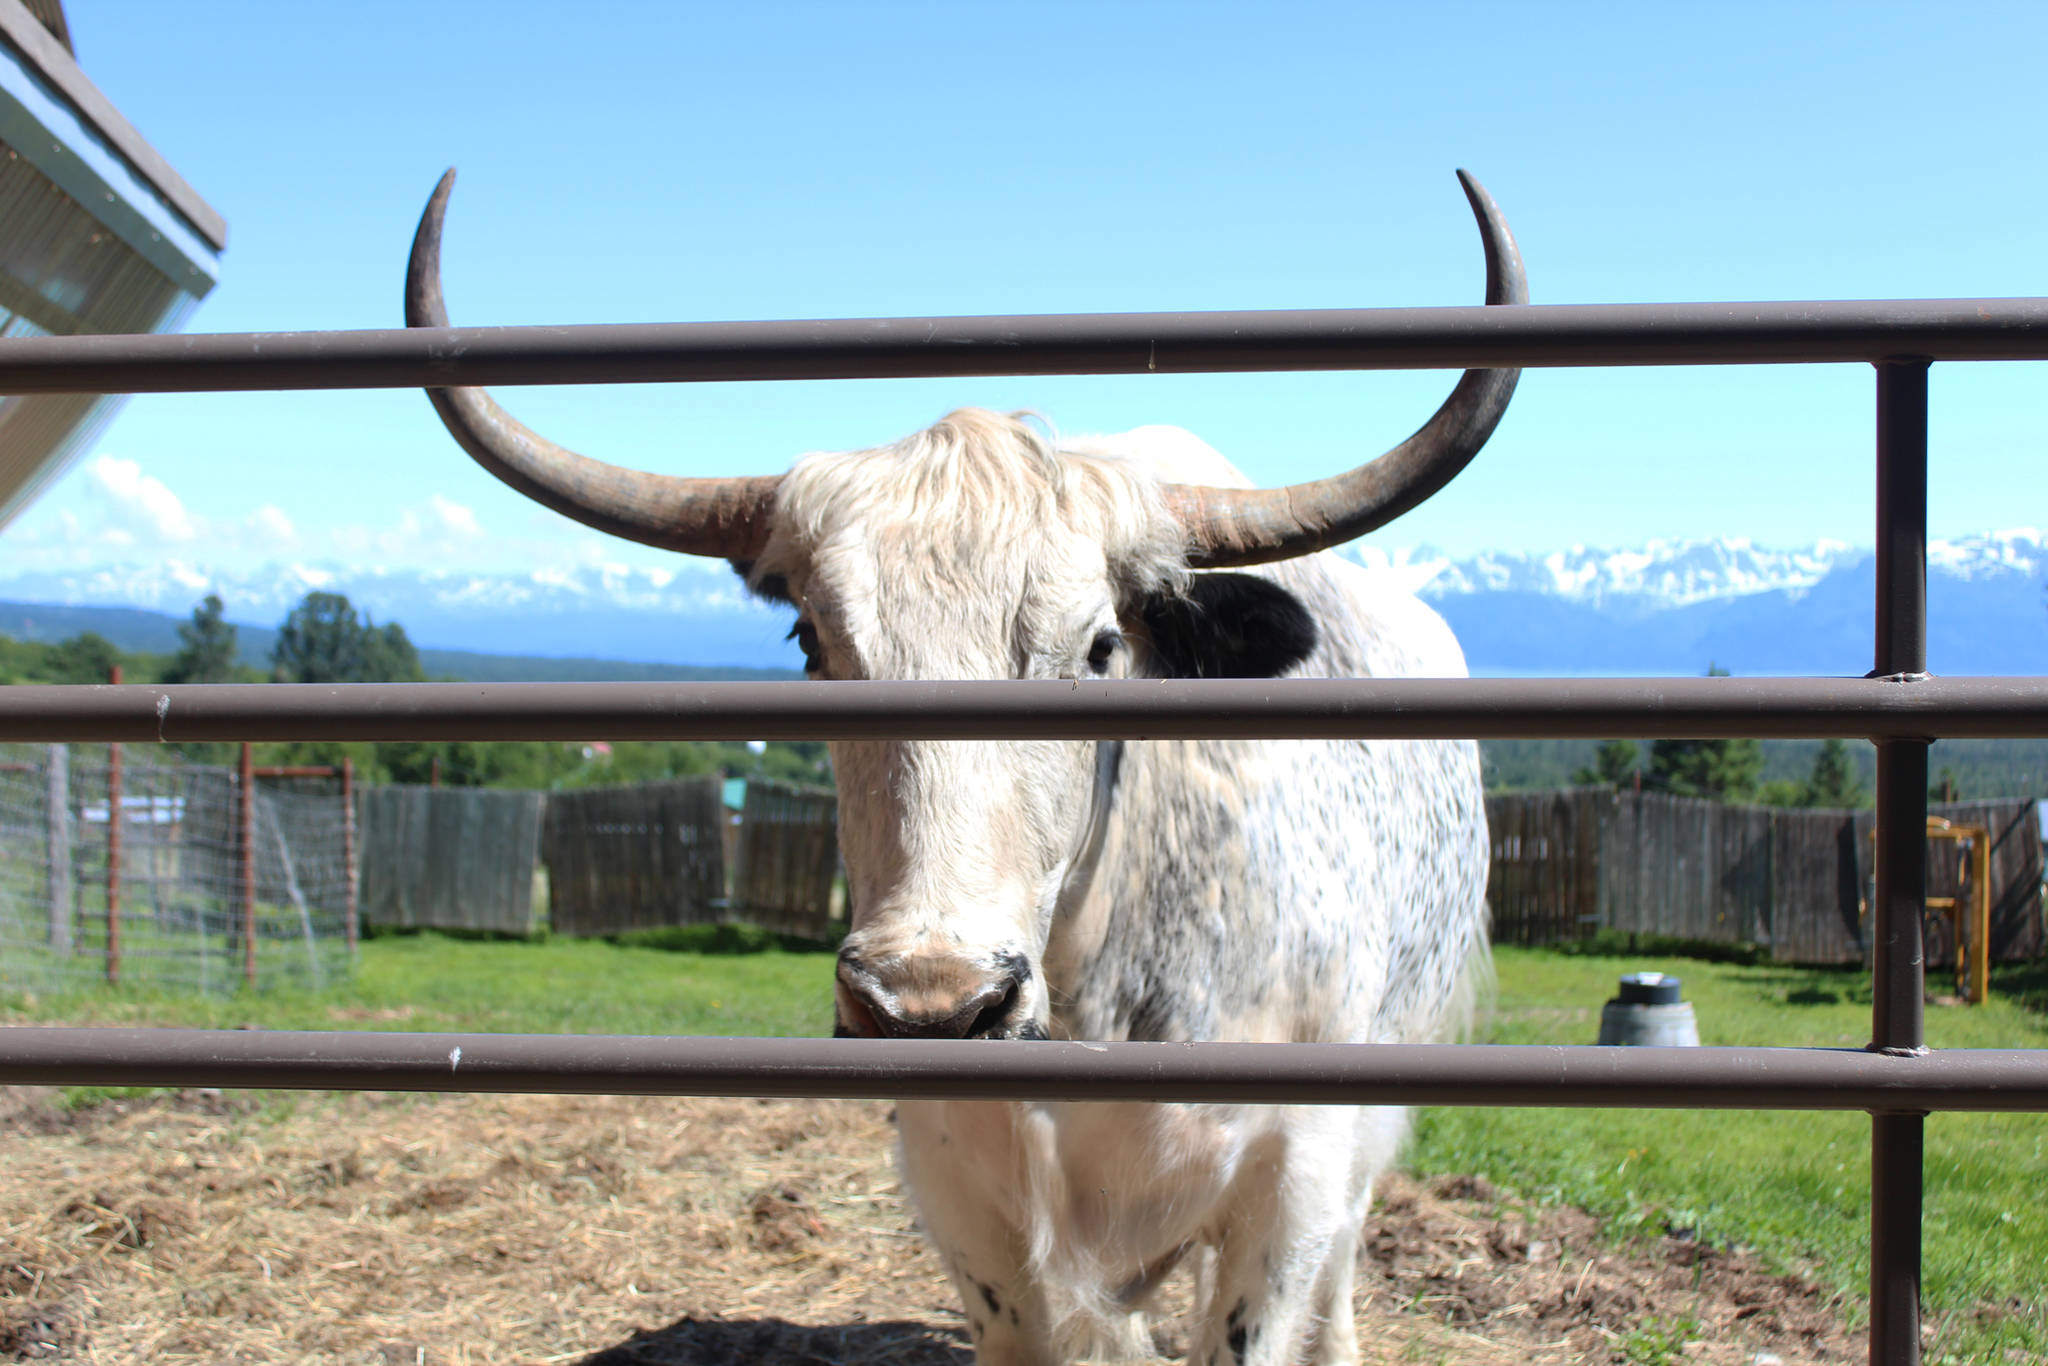 A yak, named Yeti, looks out of its pen on Friday, July 6, 2018 at the Dean family farm off East End Road near Homer, Alaska. Jeff and Ranja Dean got he yak by breeding a yak with a cow. (Photo by Megan Pacer/Homer News)